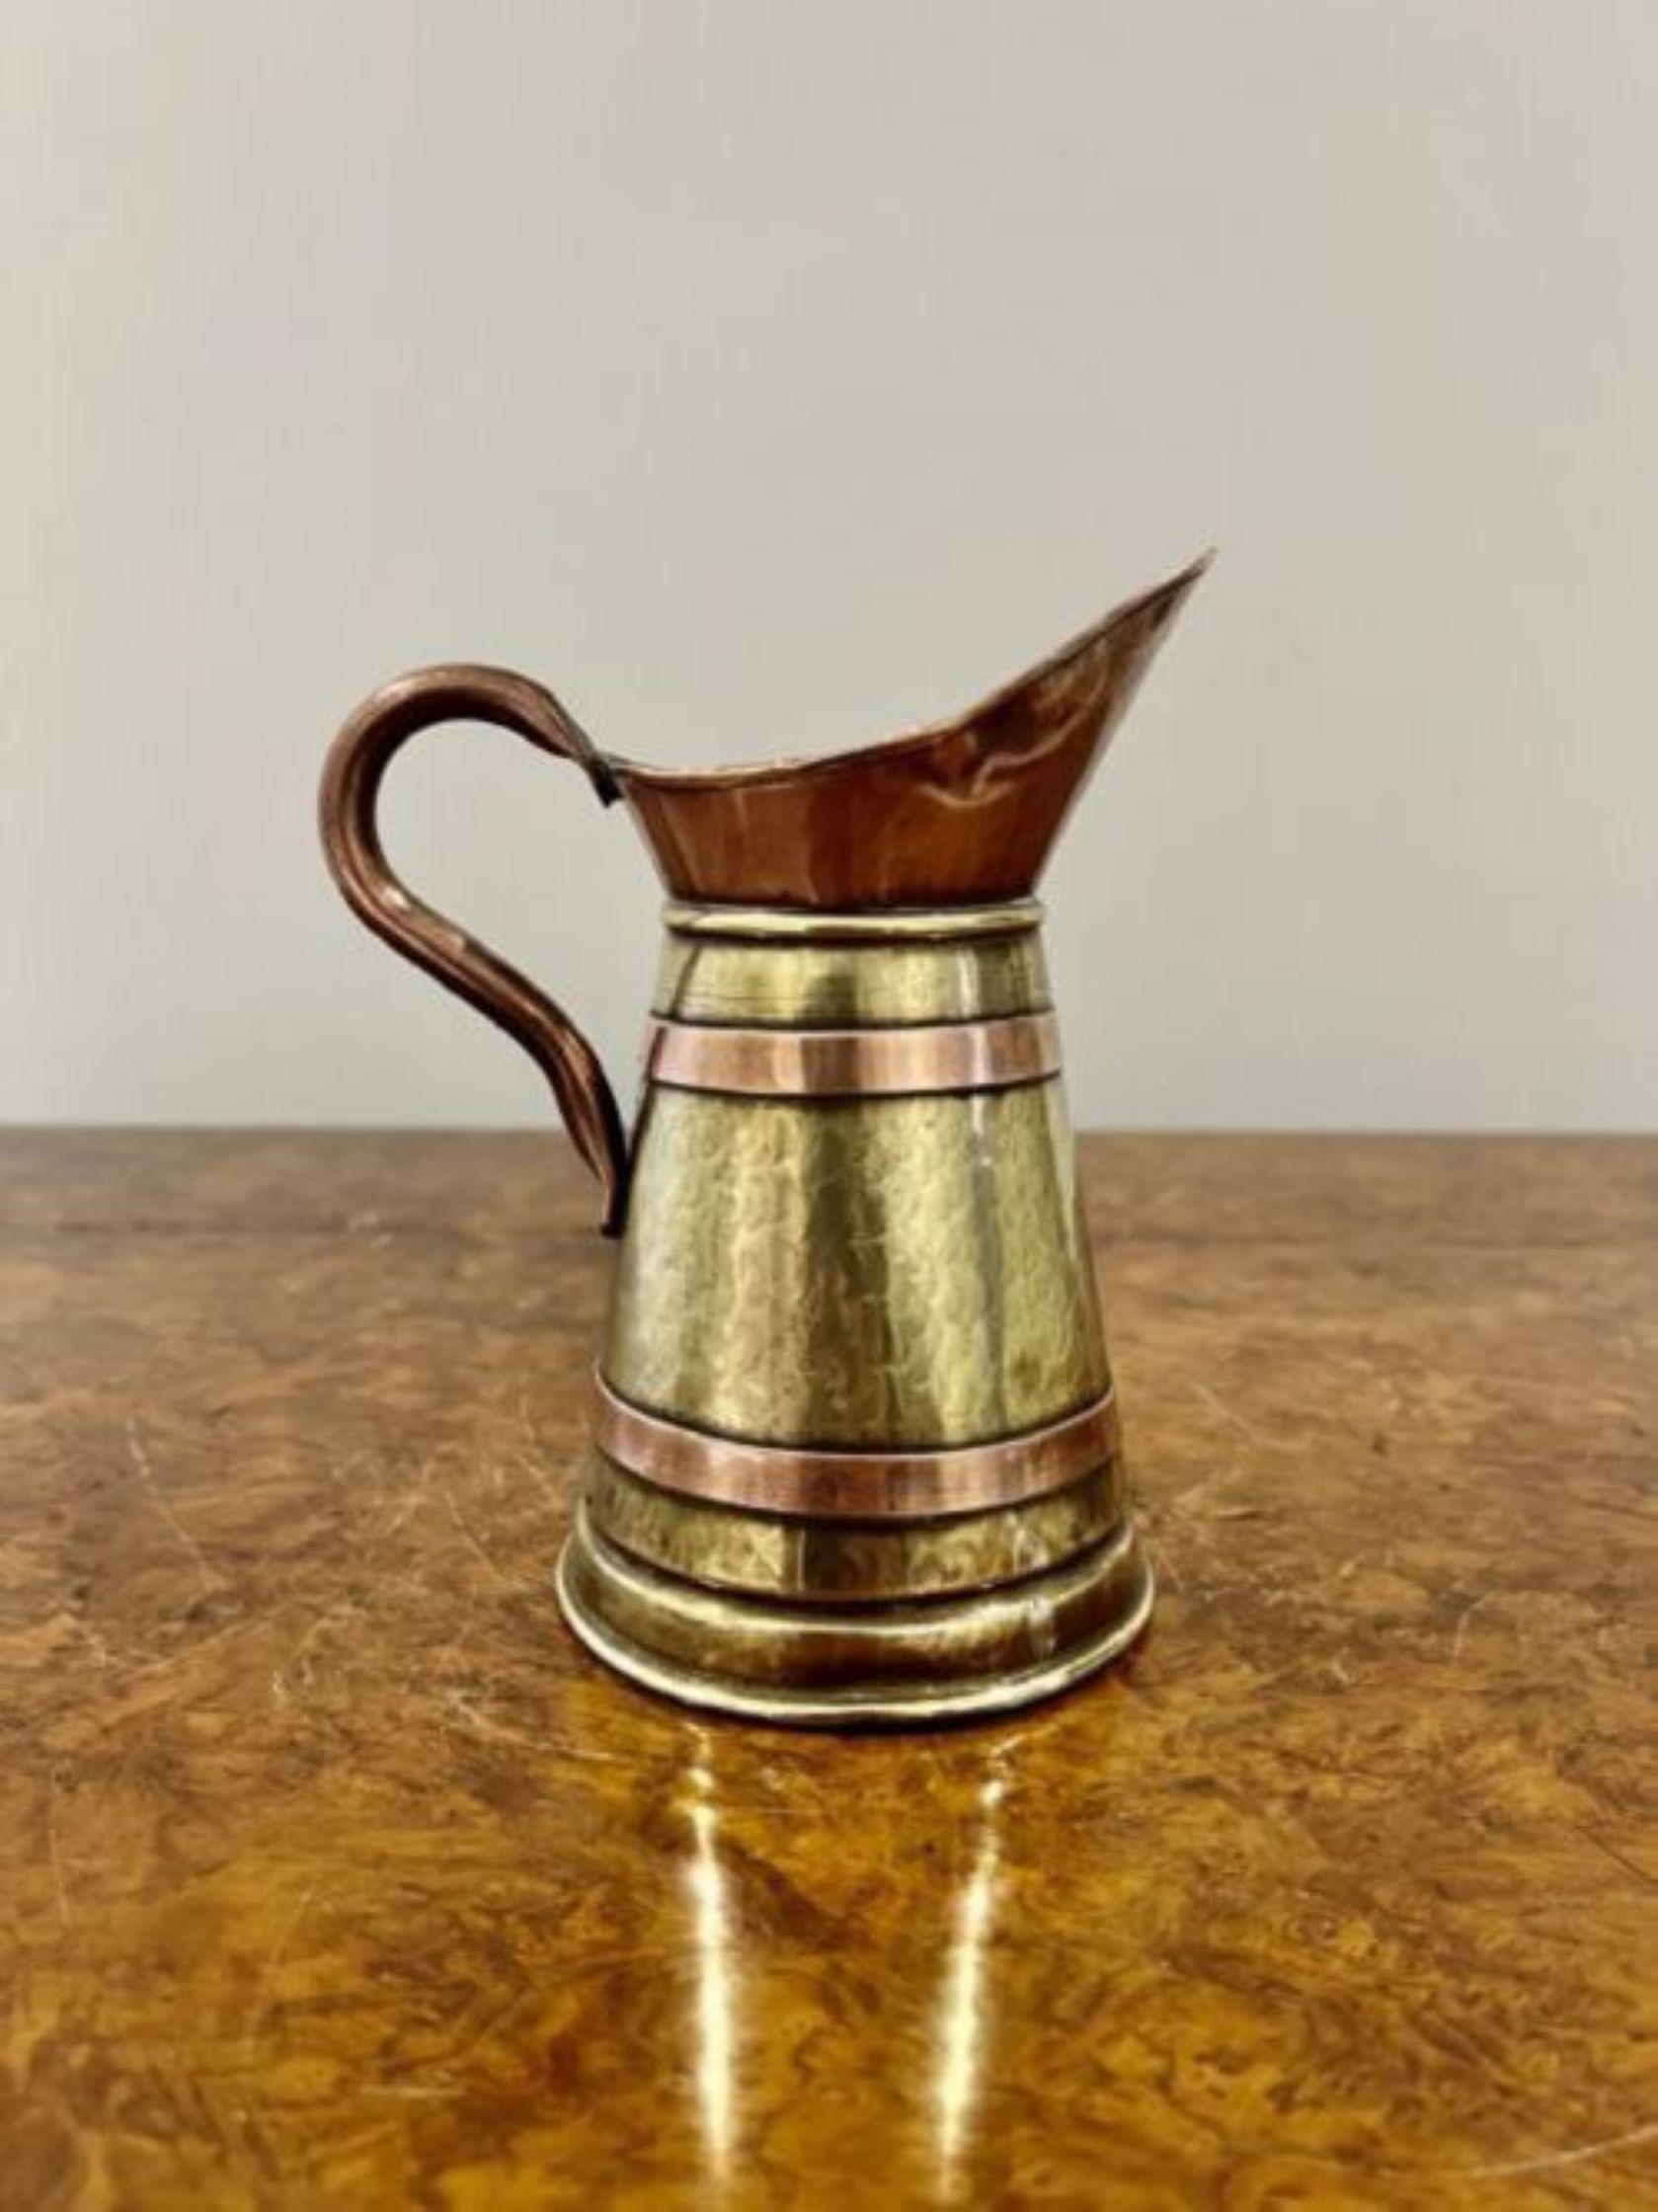 Antique Edwardian quality brass and copper jug having a quality shaped copper handle and copper bounds around a brass engraved jug 